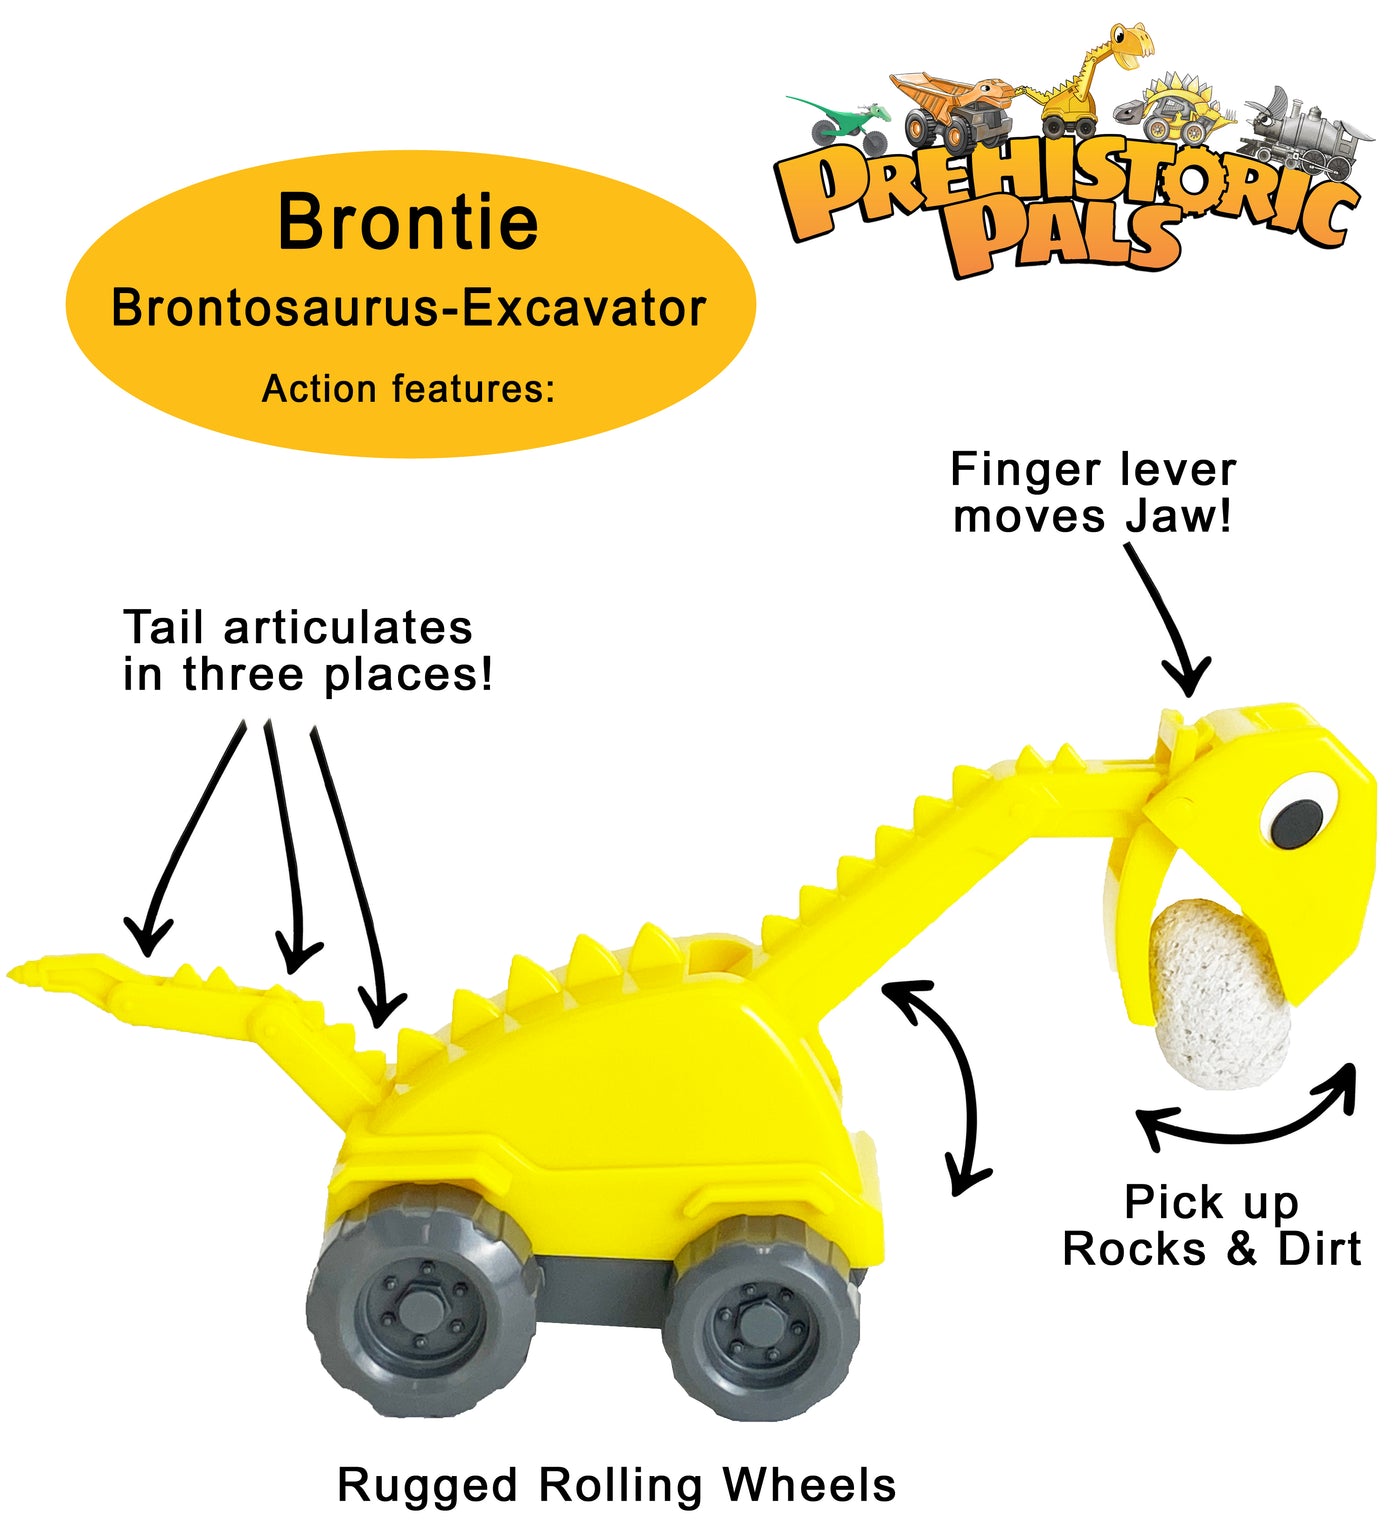 Brontie is a Brontosaurus-Excavator construction truck. It features a jaw that is moved with your finger to open and close the mouth and to pick up rocks. The  jack-hammer tails articulates in three different places. The neck rotates up and down and the 4 wheels roll to help finish the job.